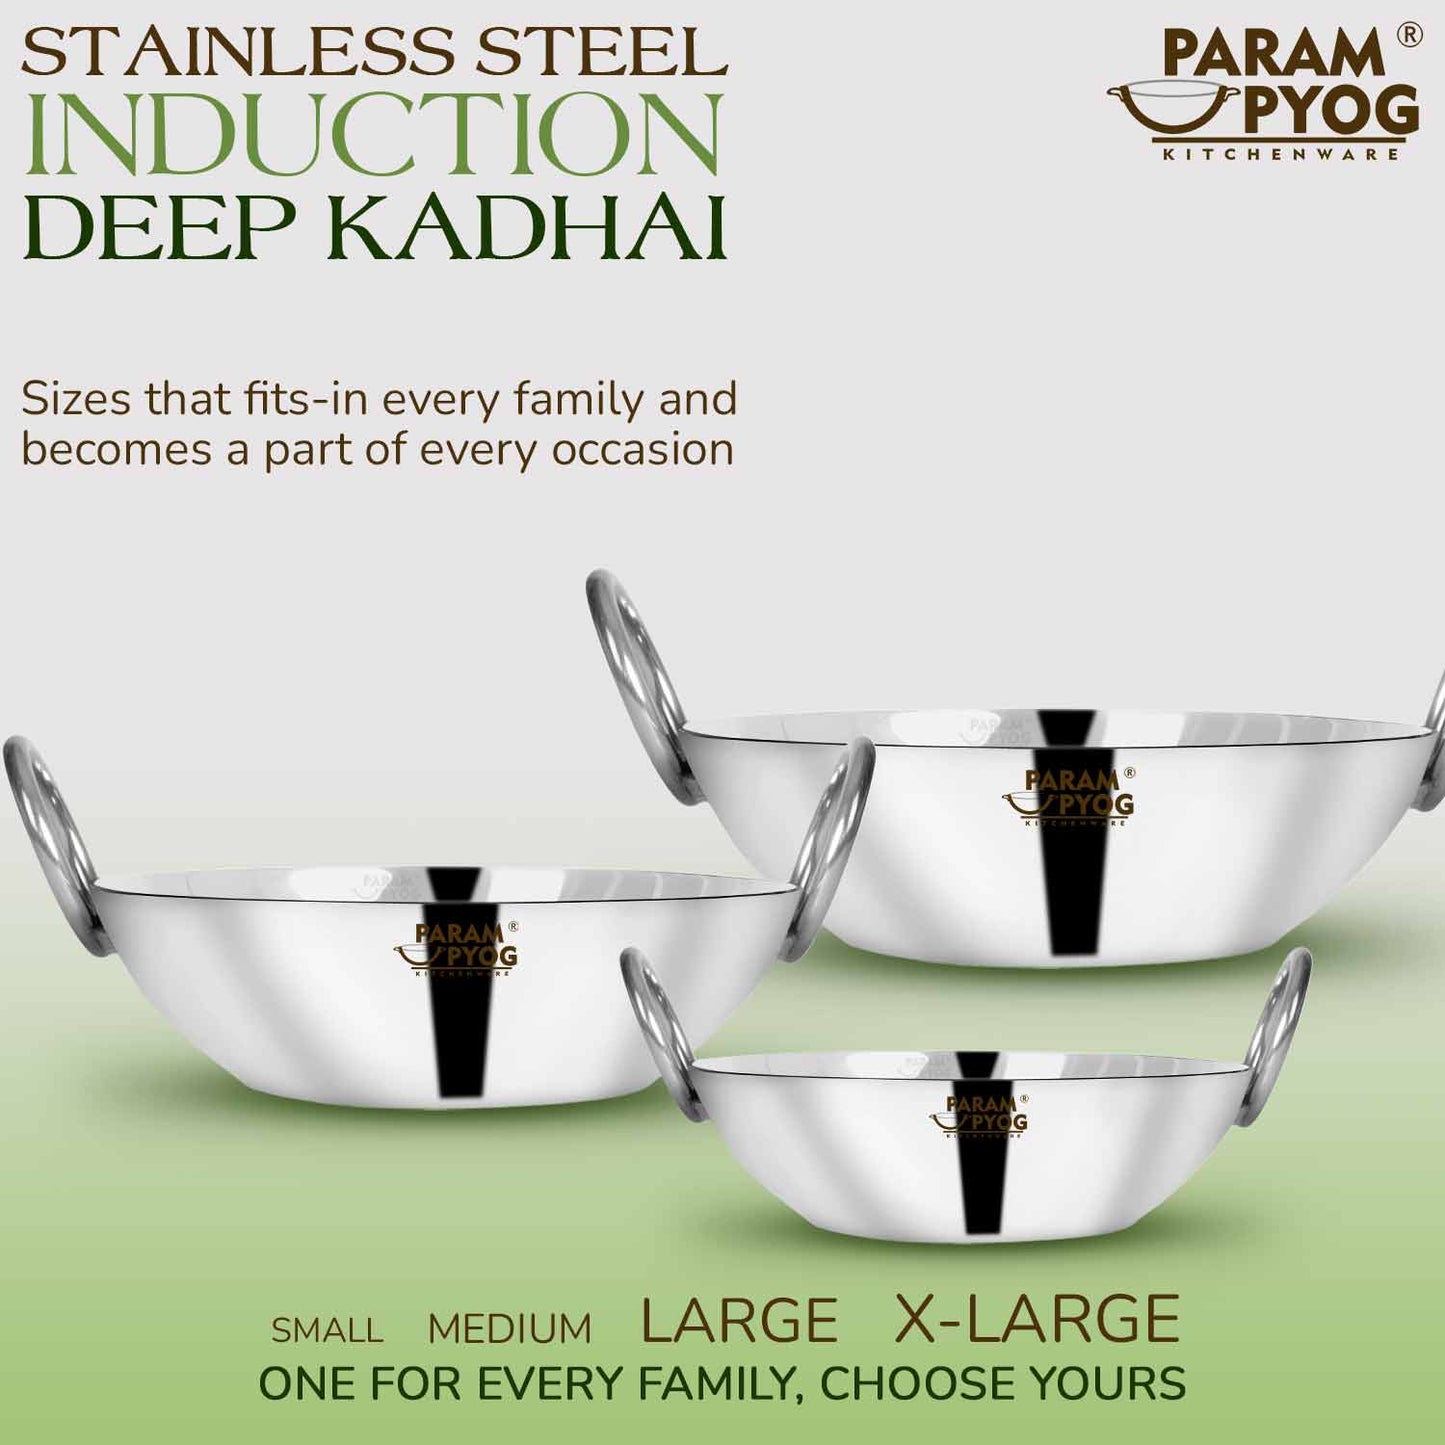 Stainless Steel Induction Deep Kadhai 2.5 Litres - 10"